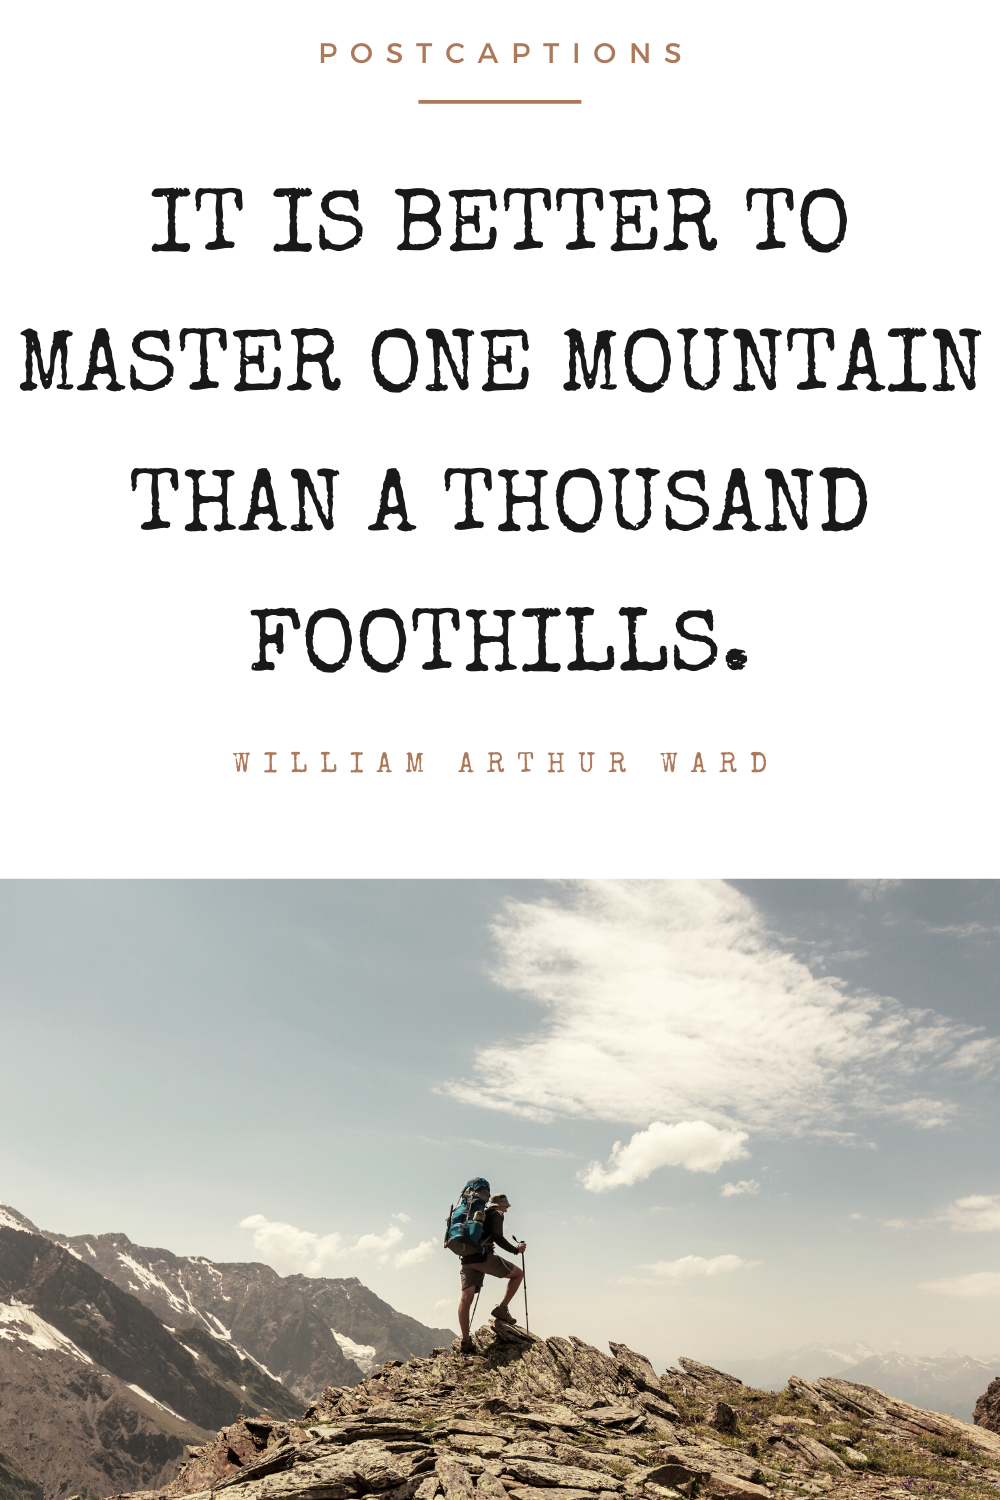 Mountain quotes for Instagram